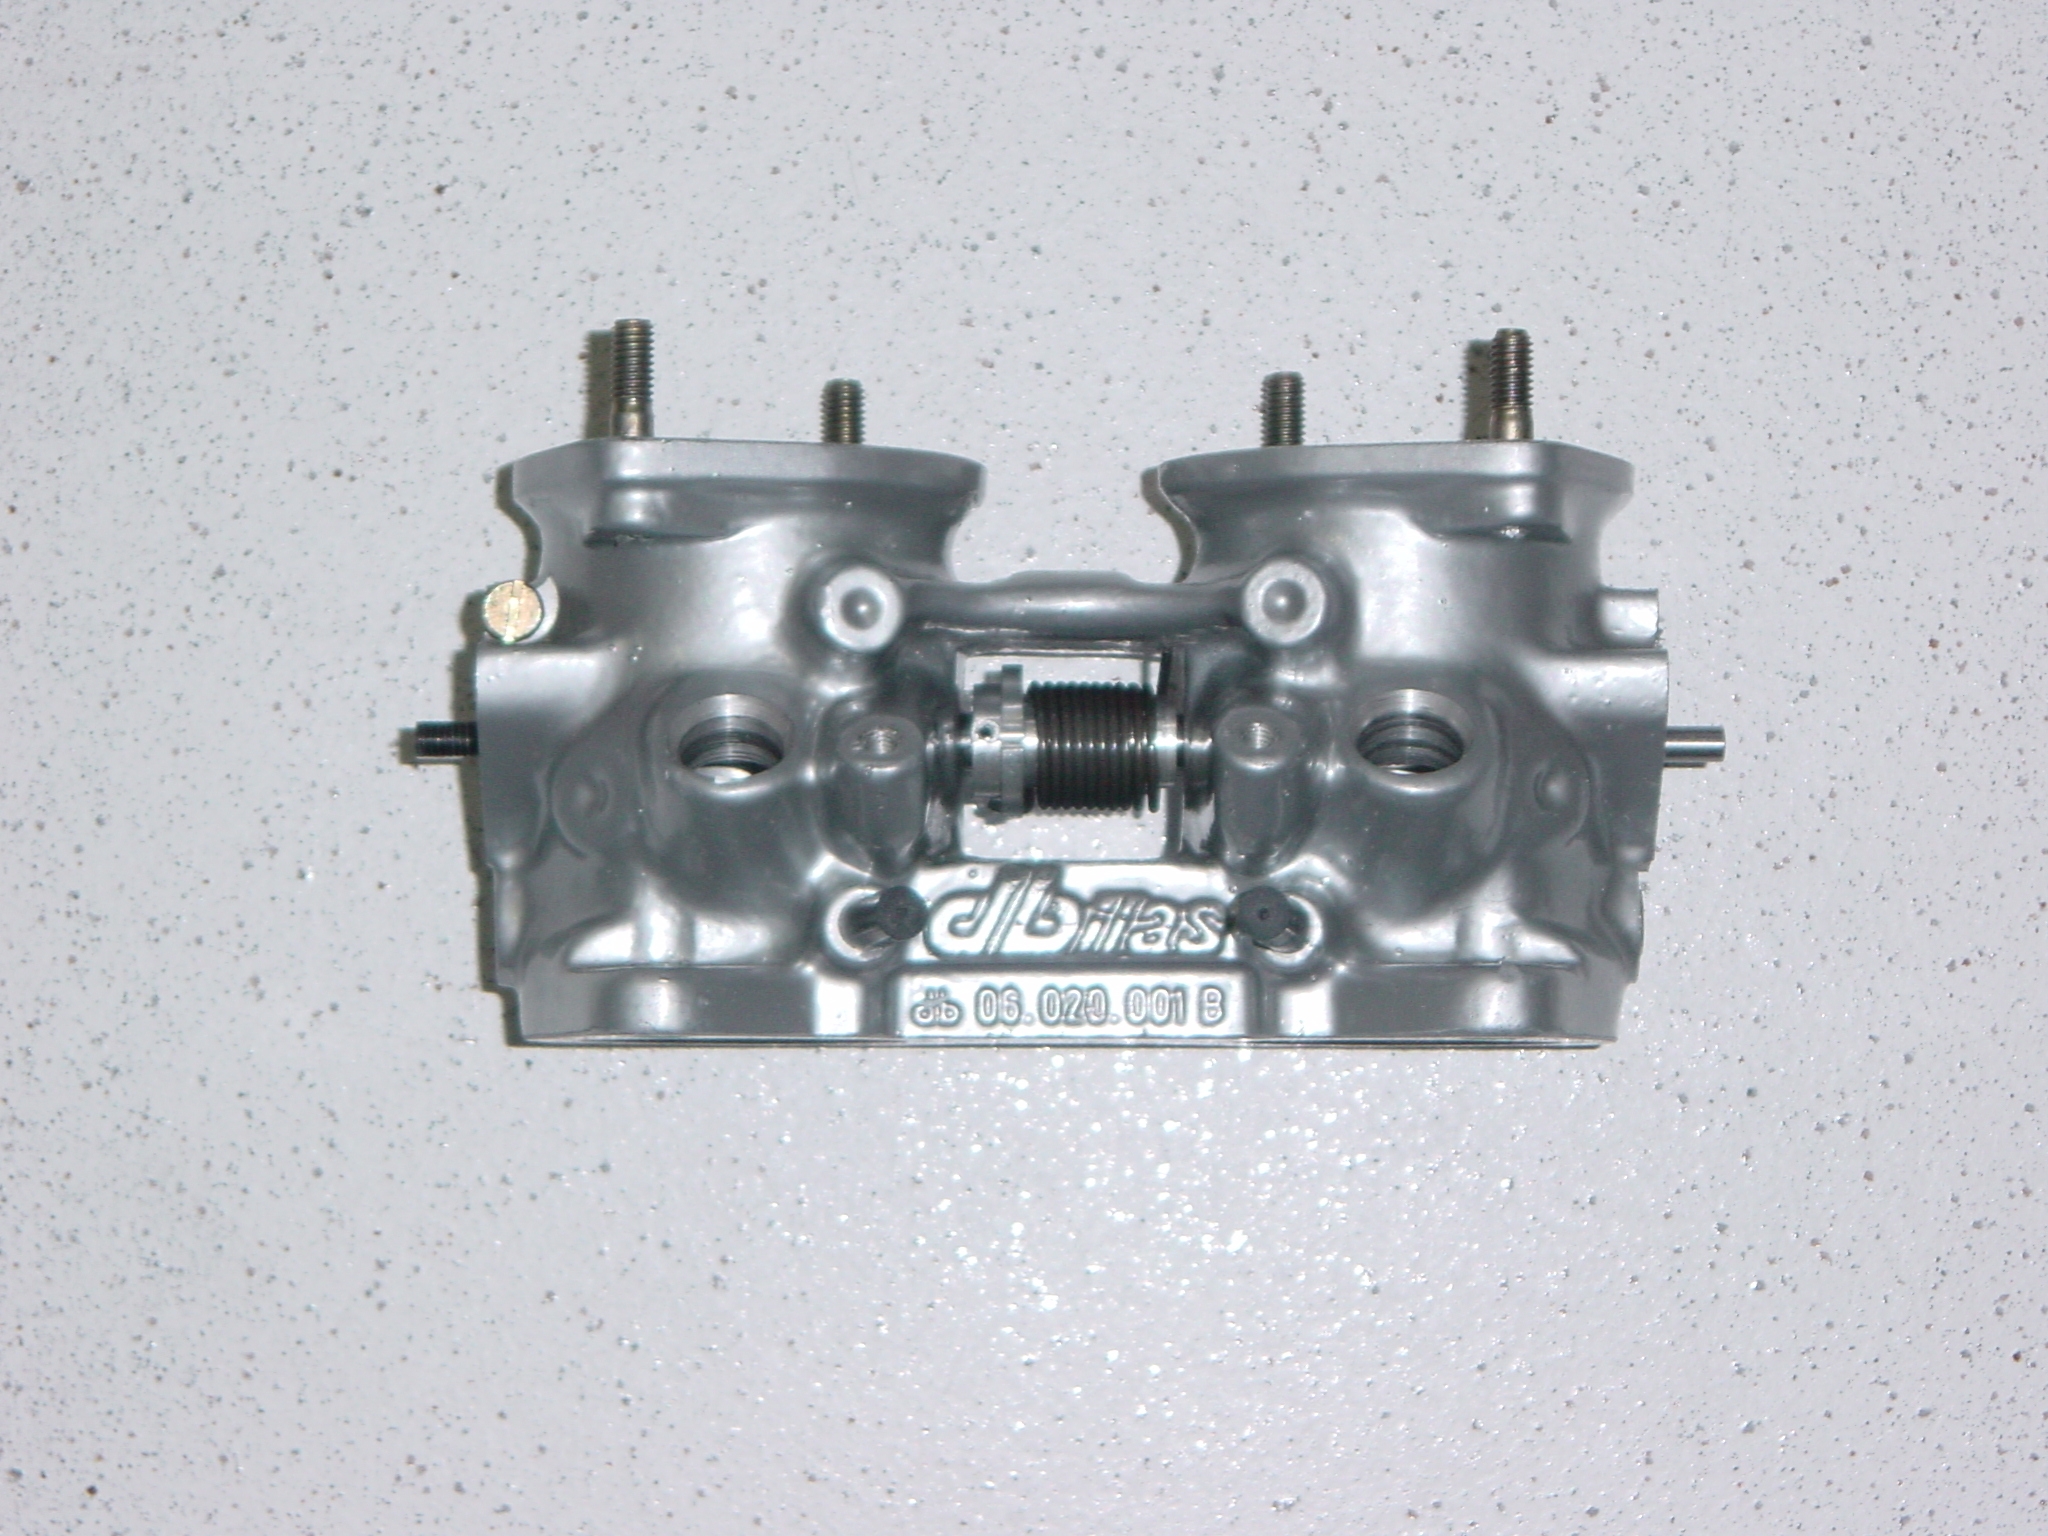 Throttle bodies 45 mm  Diameter: 45mm / Leight: 80mm  with Flange / with Drill holes